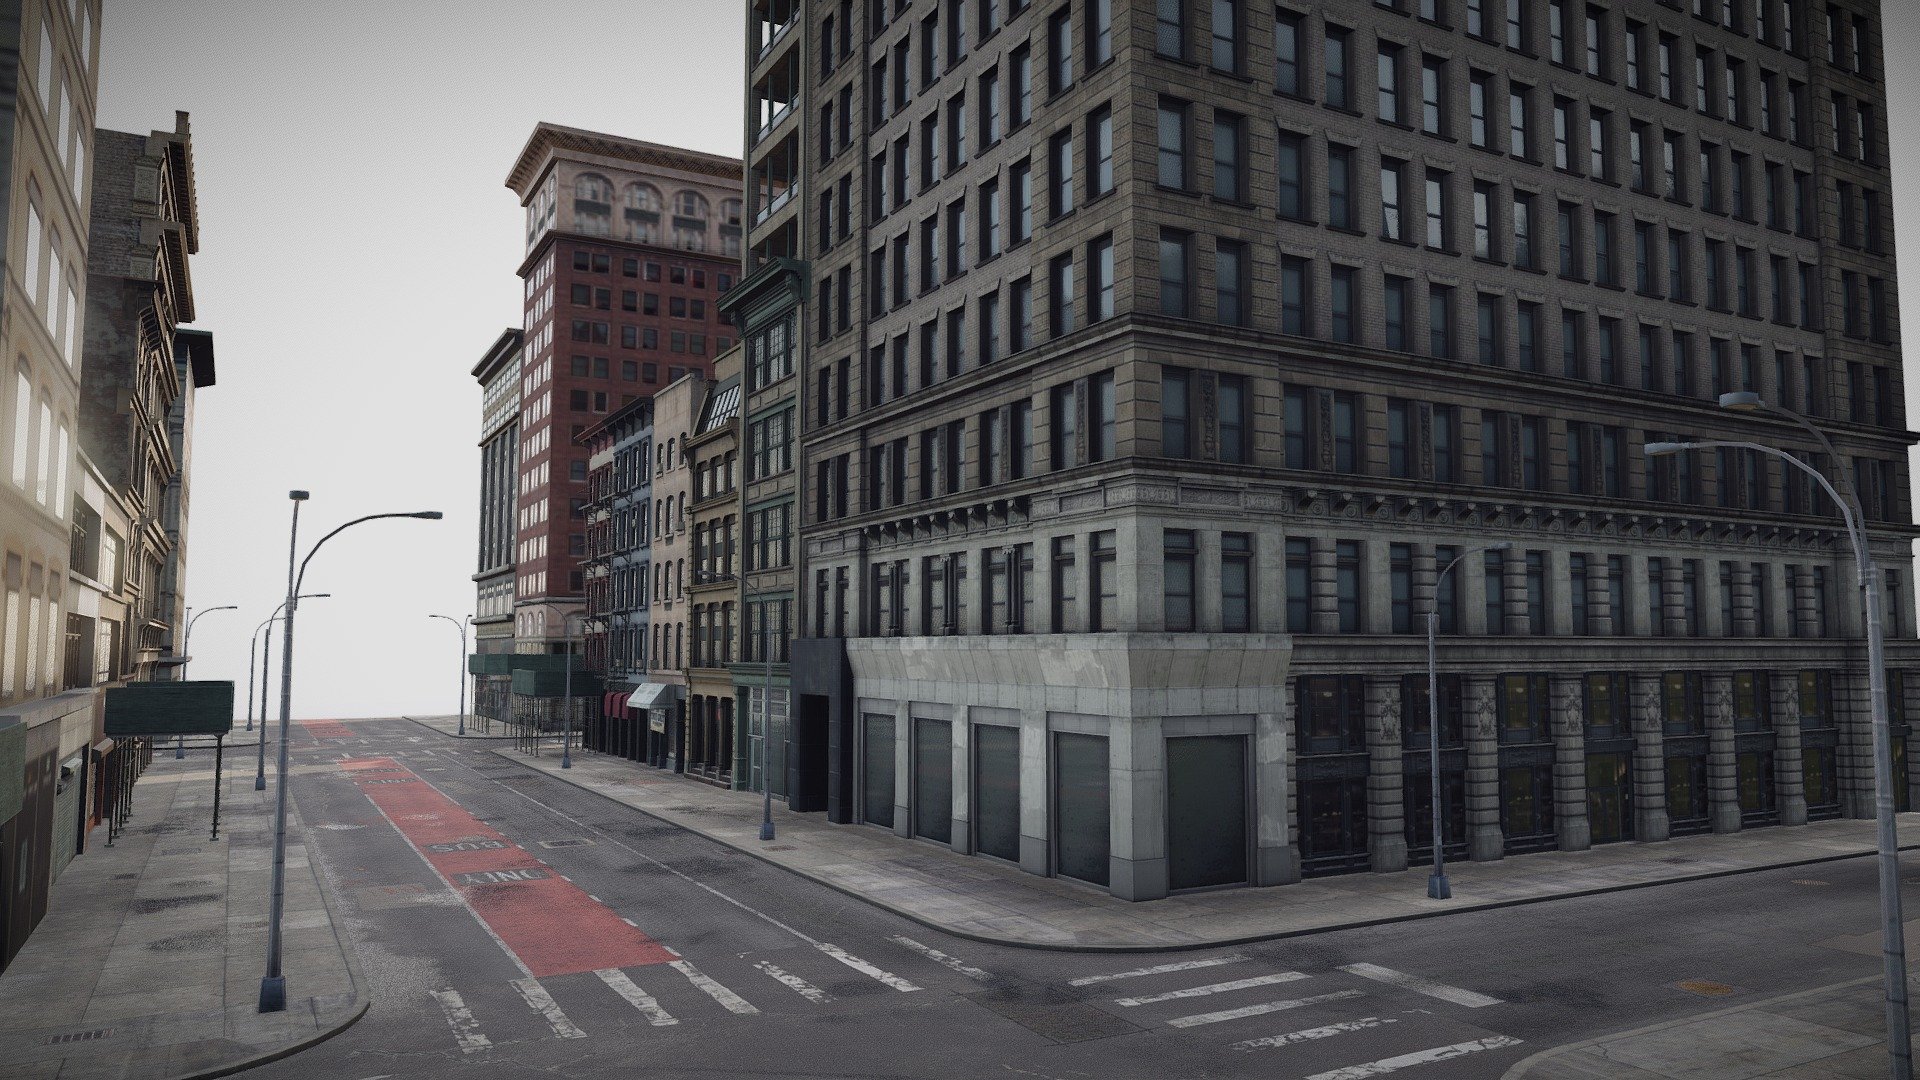 A detailed recreation of a city block in Manhattan: 358 Broadway Street. Contains 9 high quality NYC buildings and 8 lower quality background buildings.

Scene Information:




Modelled in Blender 3.3.2

Fully UV unwrapped

All materials are allocated to their respective objects.

Textures Included:




2k/3k/4k baked resolution textures

Diffuse

Roughness

Ambient Occlusion 

Opacity

Normal maps (Only for roads)

Formats:

.obj 
.blend
.fbx

Enjoy and have a nice day 3d model